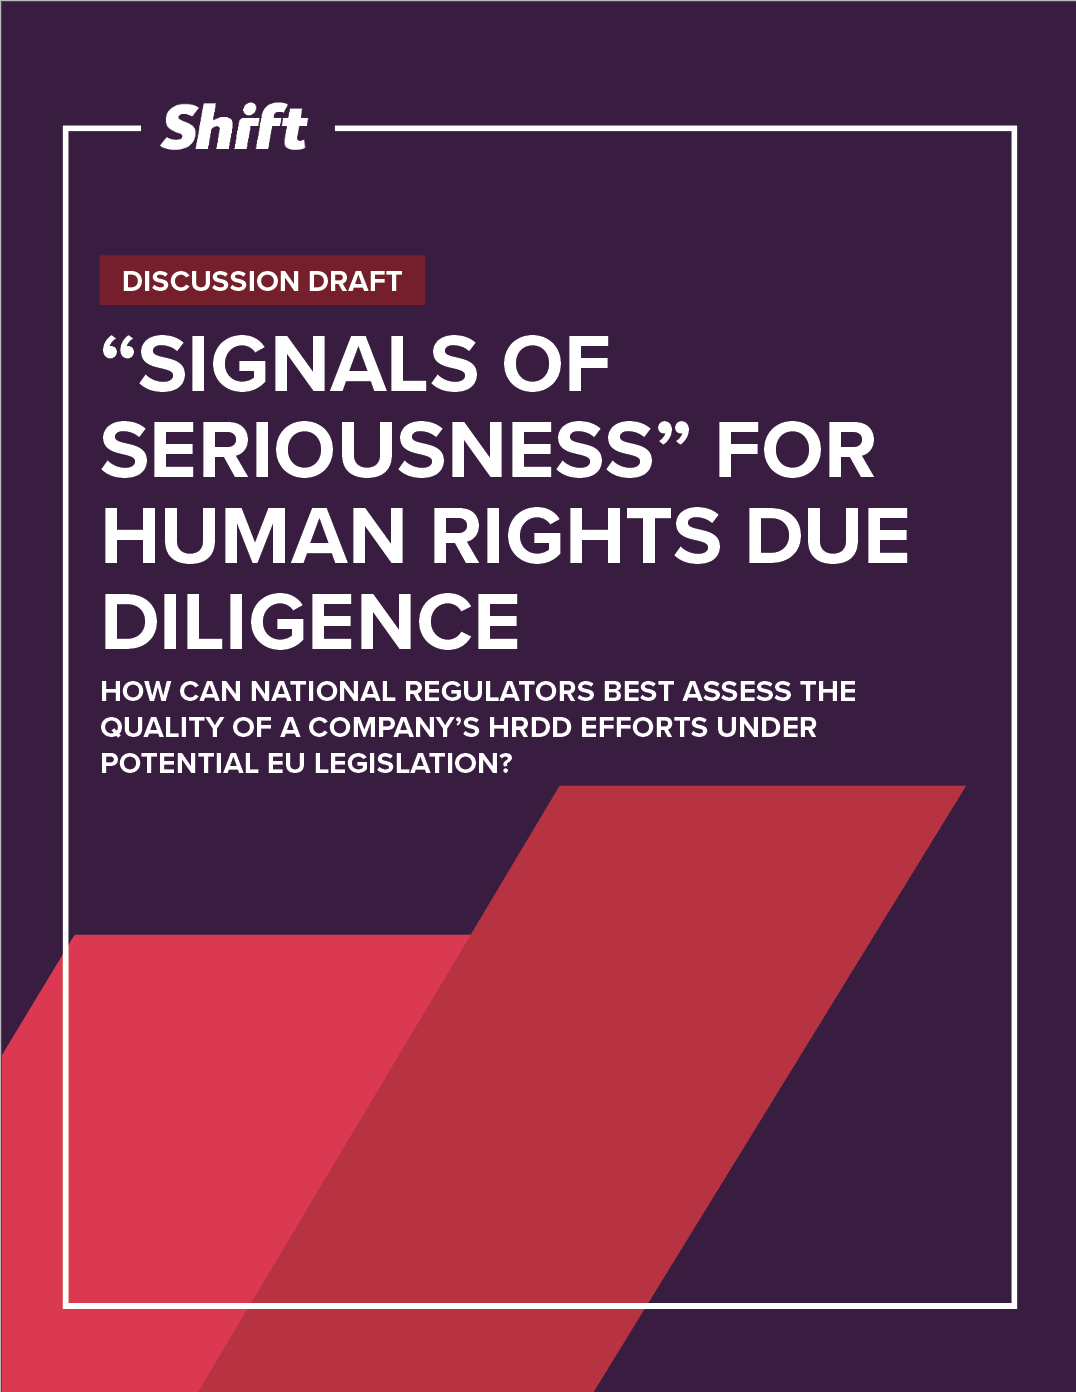 “Signals of Seriousness” for Human Rights Due Diligence